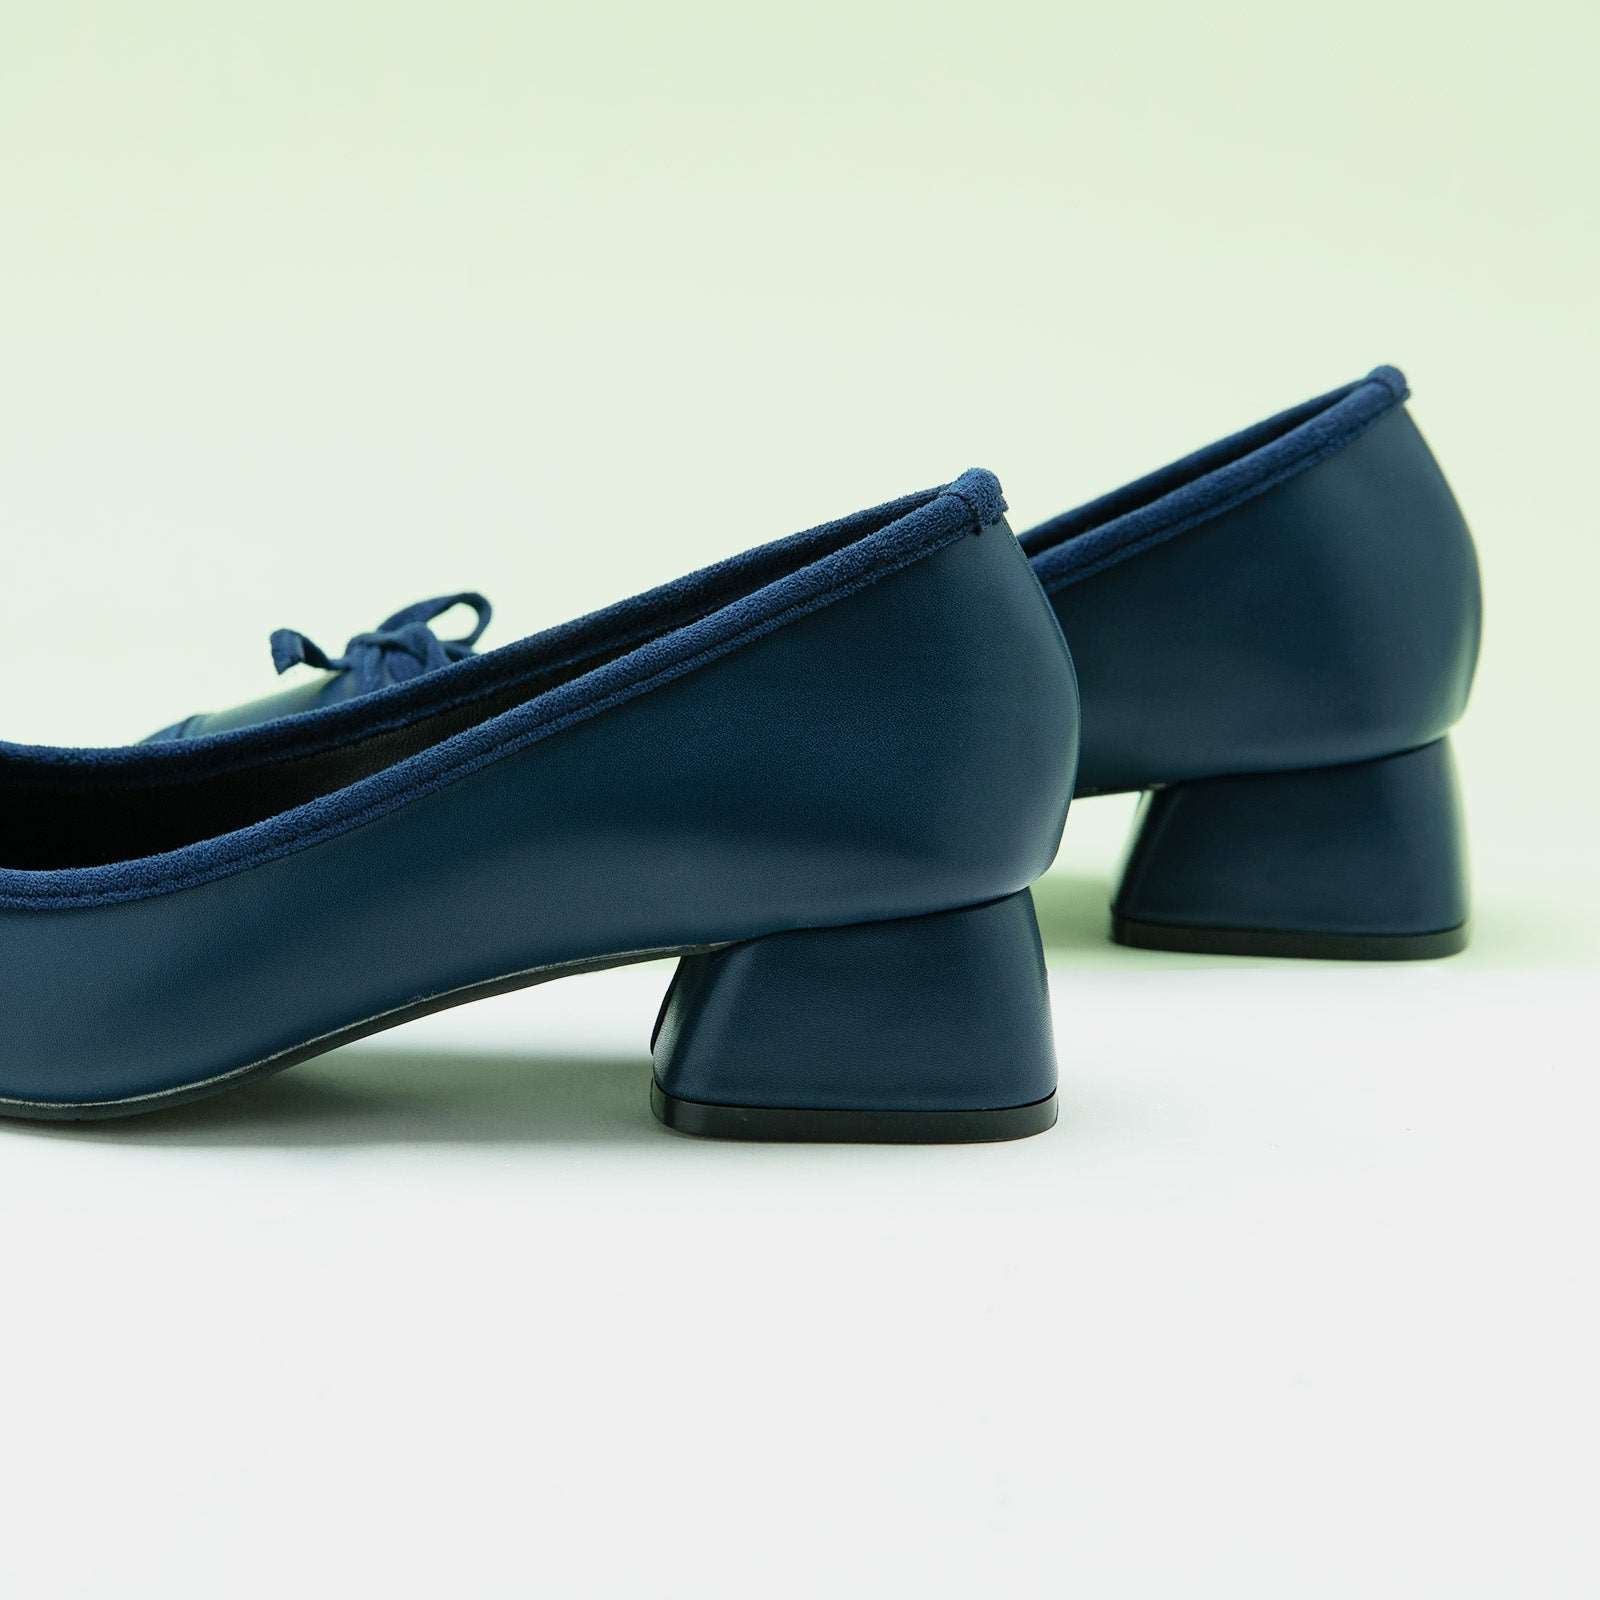 Navy Low Heels Shoes: Classic Sophistication